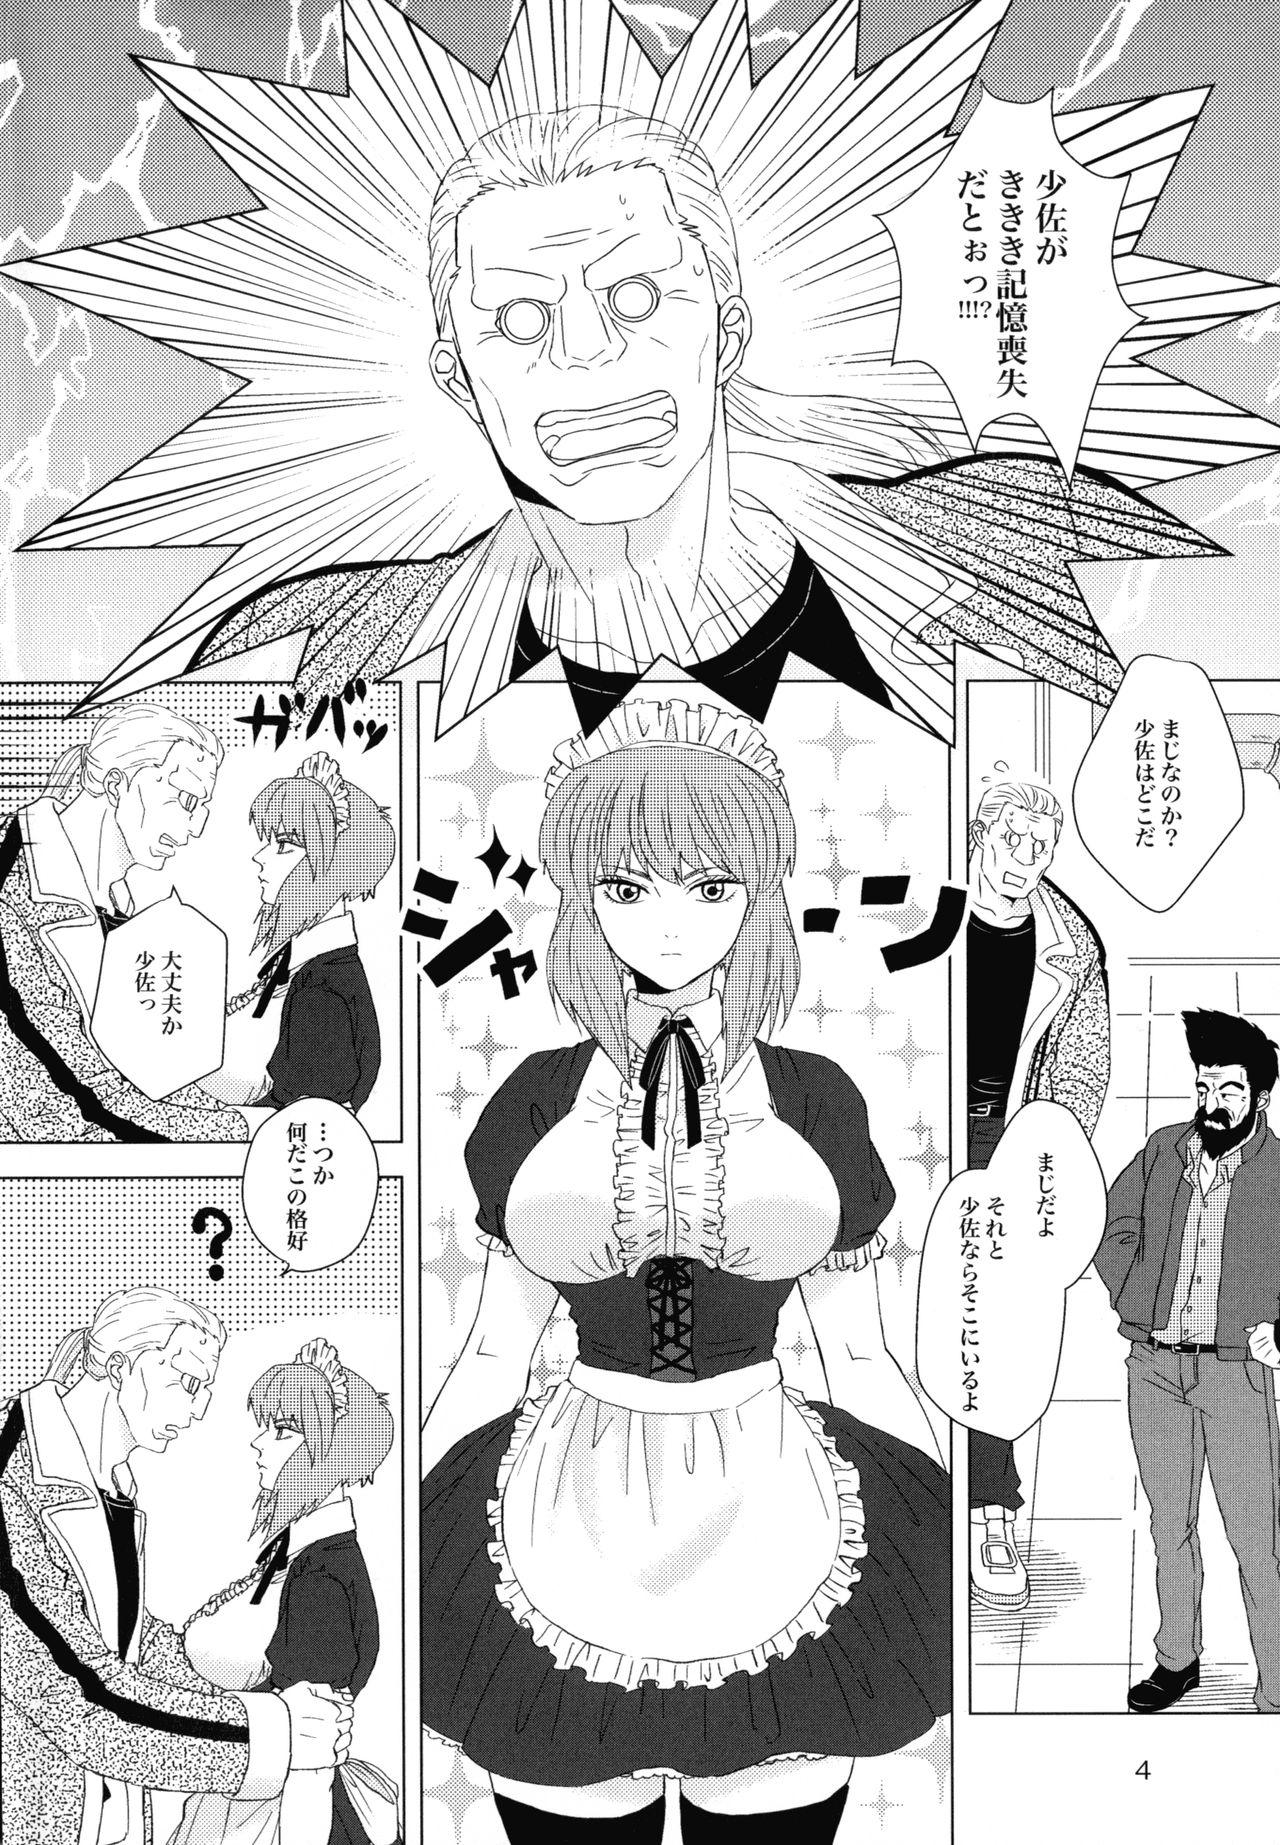 Egypt FRENCHMAIDCOSTUME BTMT - Ghost in the shell Leche - Page 4